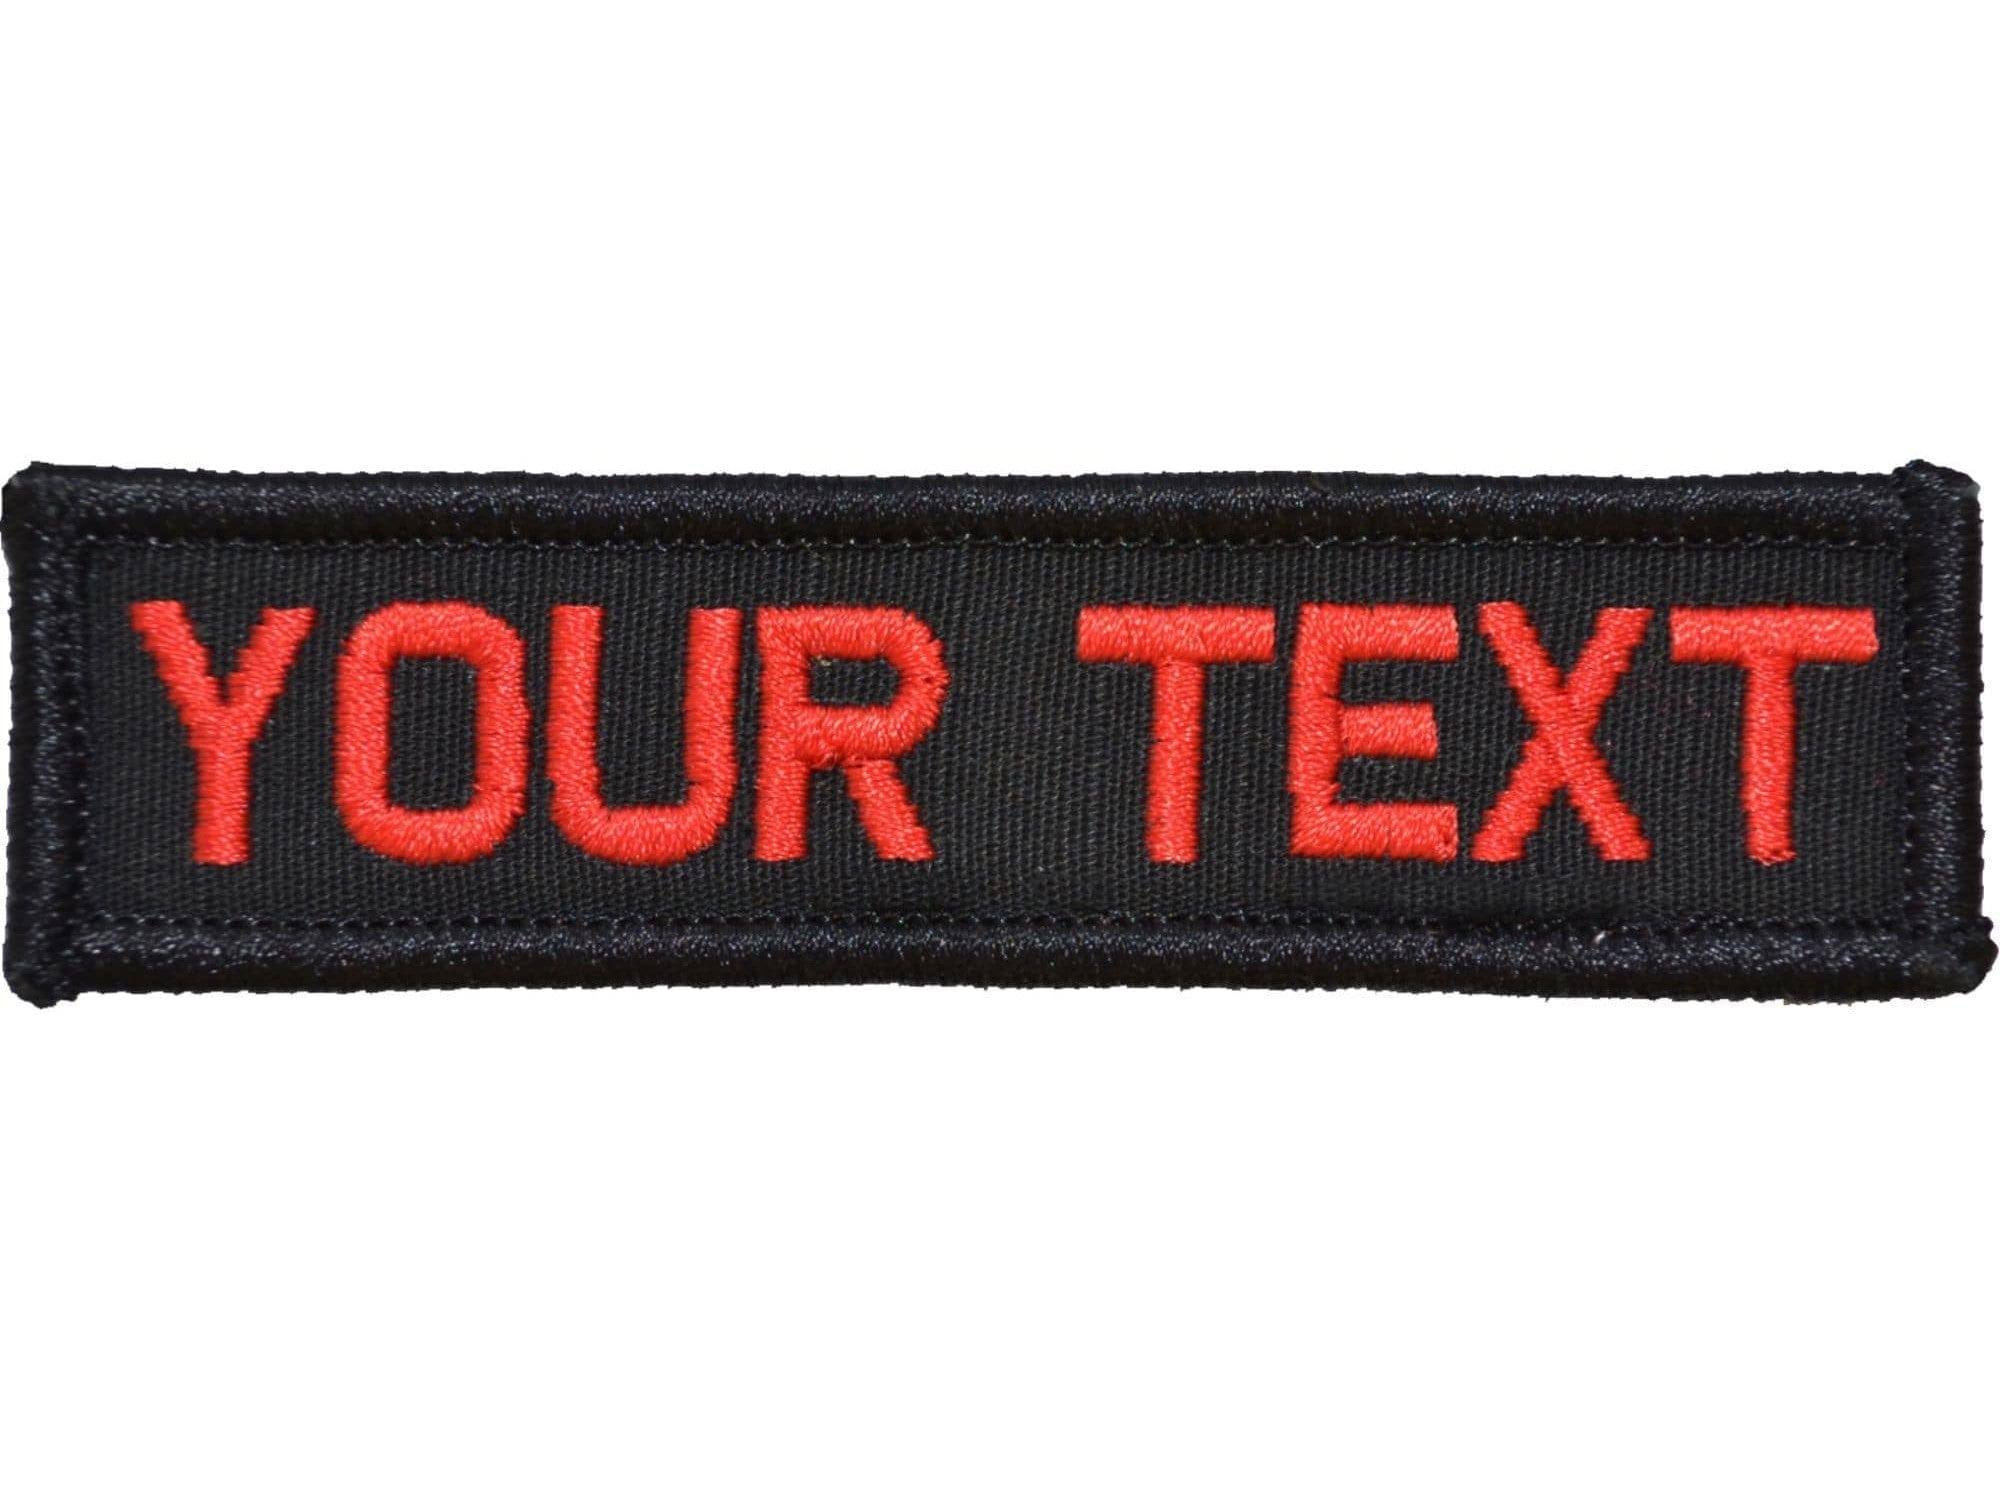 Name Patches Backpacks, Custom Backpack Patches